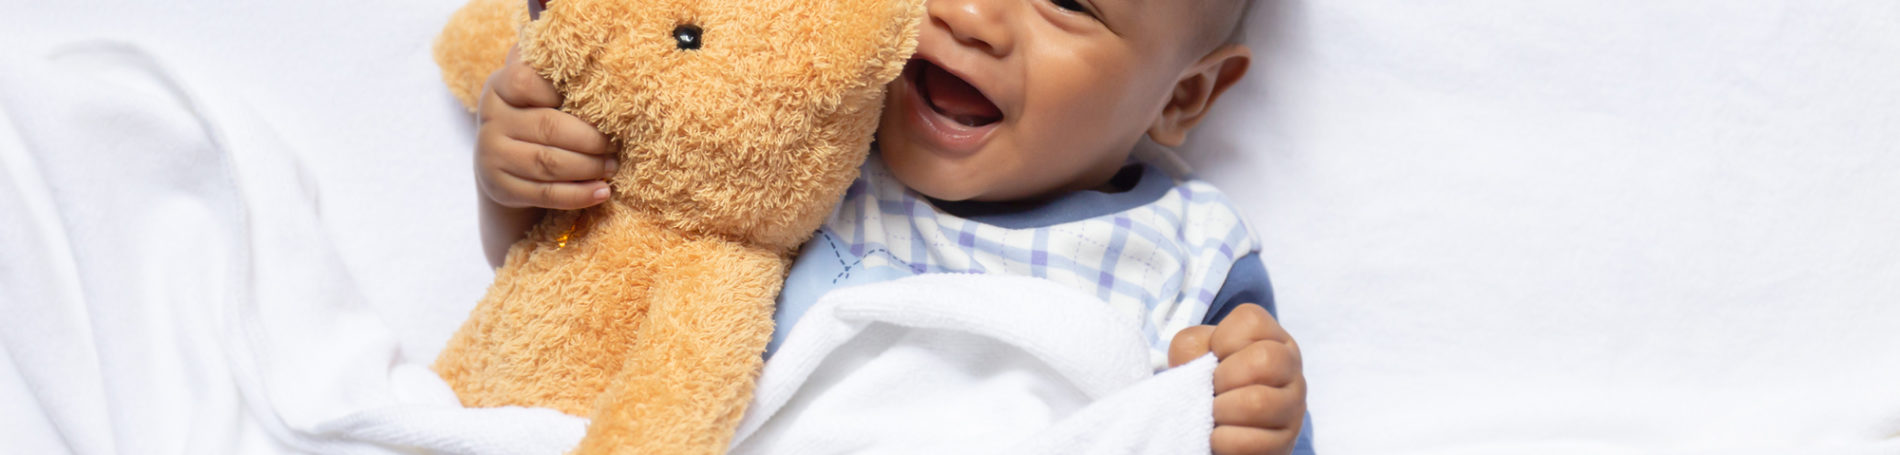 African baby laughing with a blanket over him and holding a teddy bear